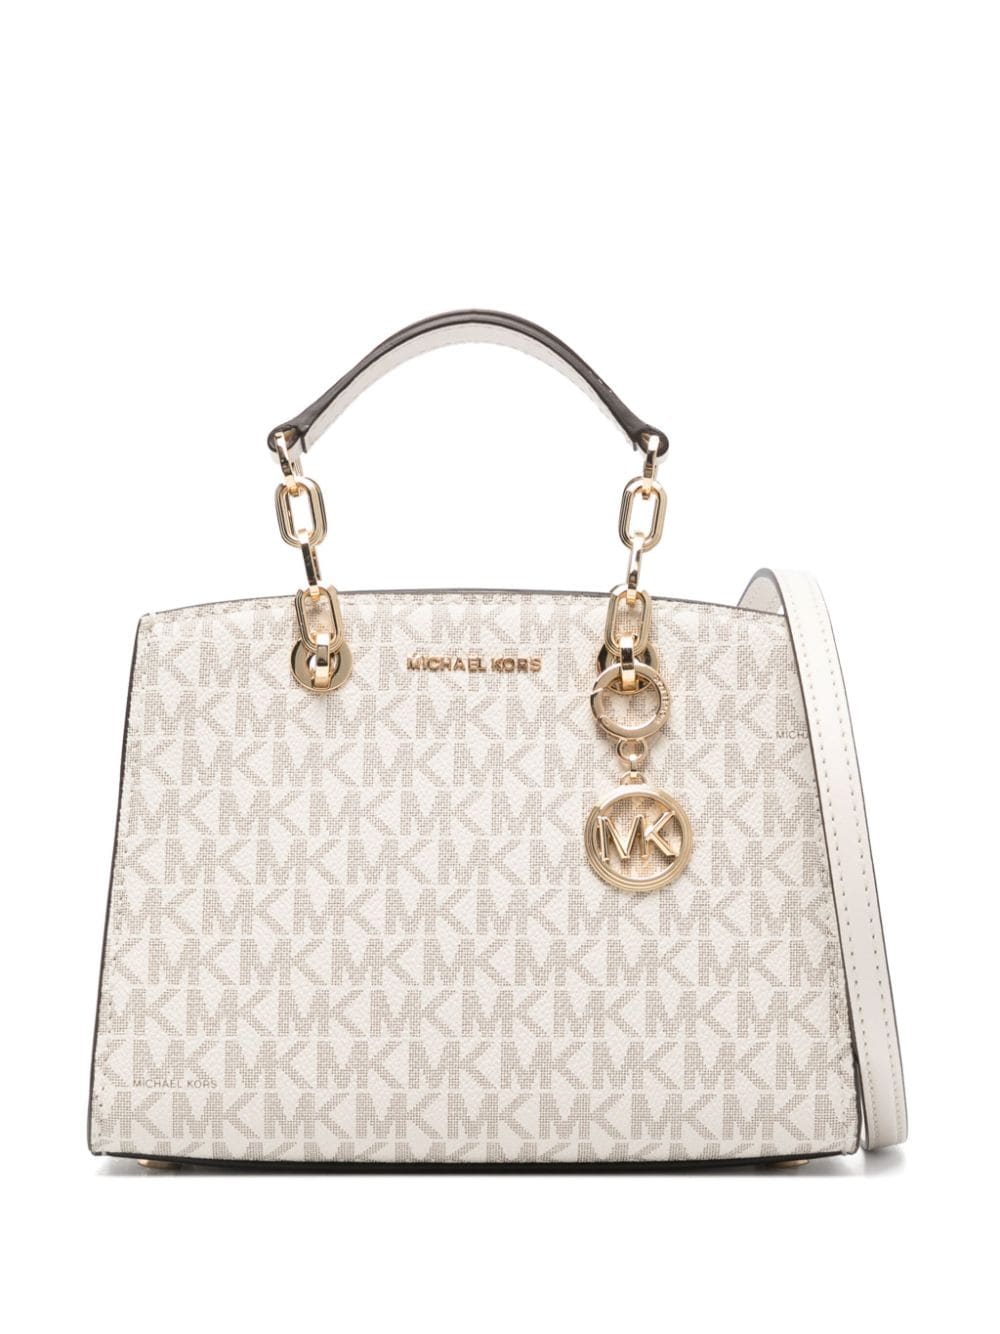 Michael Kors Cynthia Leather Tote Bag In Neutrals